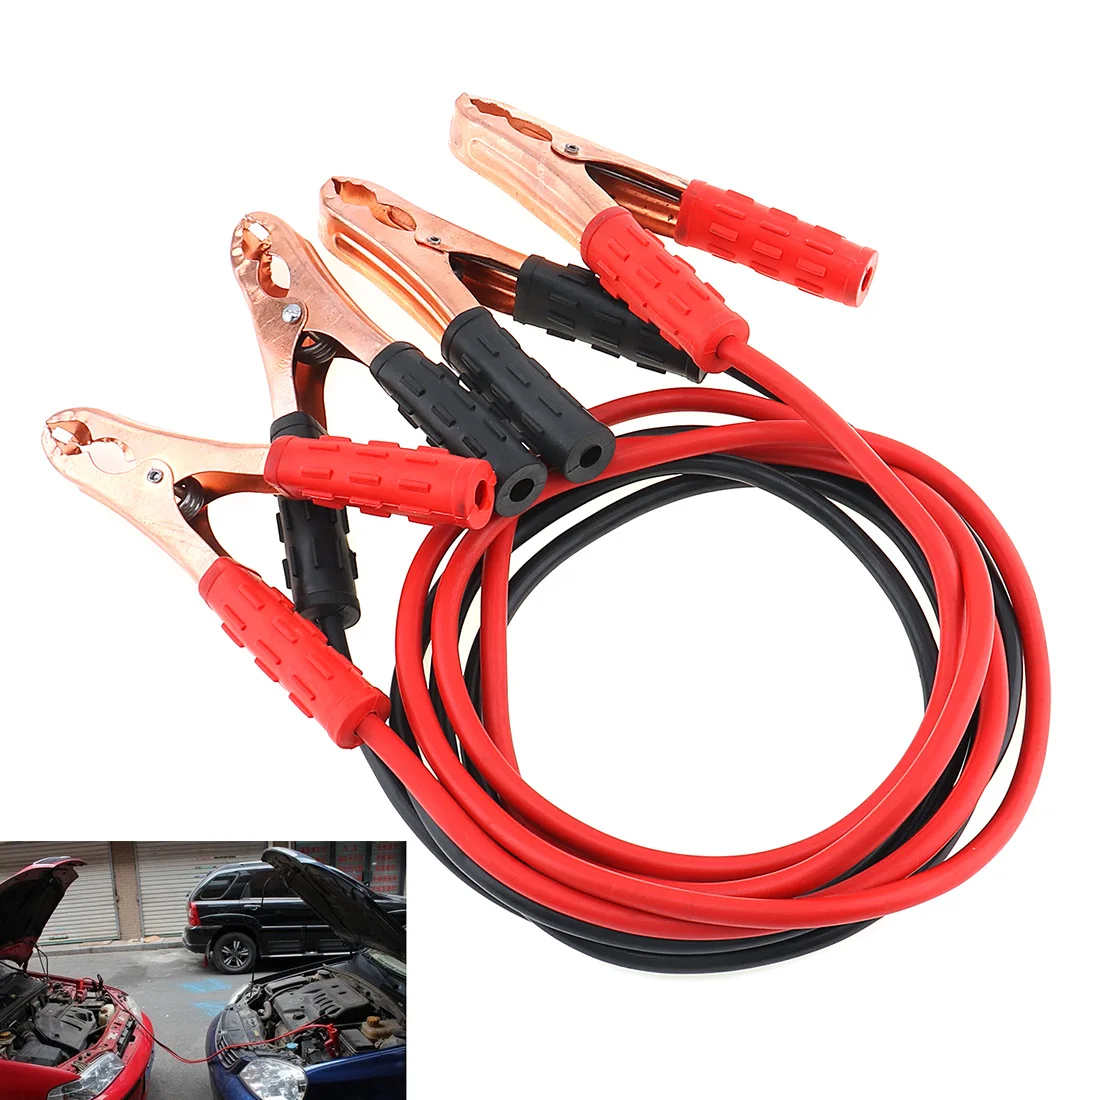 

2M 300A Car Battery Booster Cable Emergency Ignition Jump Starter Leads Wire Battery Booster Insulatd Cable For Car Van SUV